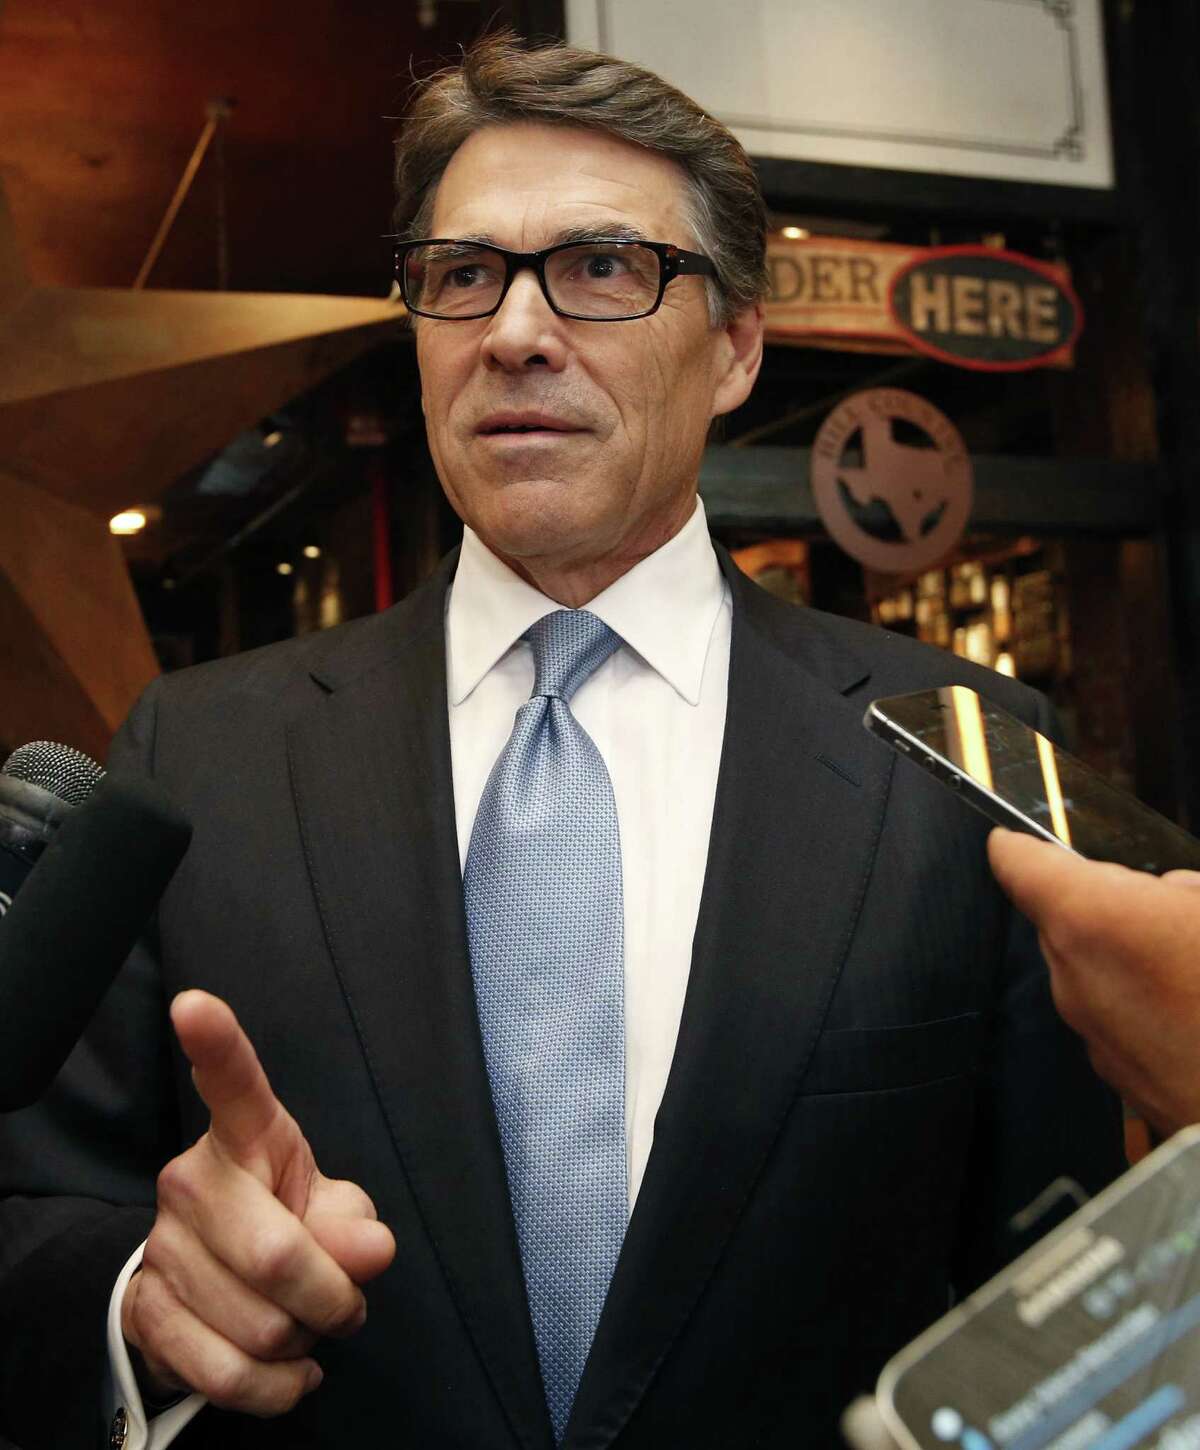 "Even if an alcoholic is powerless over alcohol once it enters his body, he still makes a choice to drink. And, even if someone is attracted to a person of the same sex, he or she still makes a choice to engage in sexual activity with someone of the same gender." –Rick Perry, writing in his 2008 book, "On My Honor"